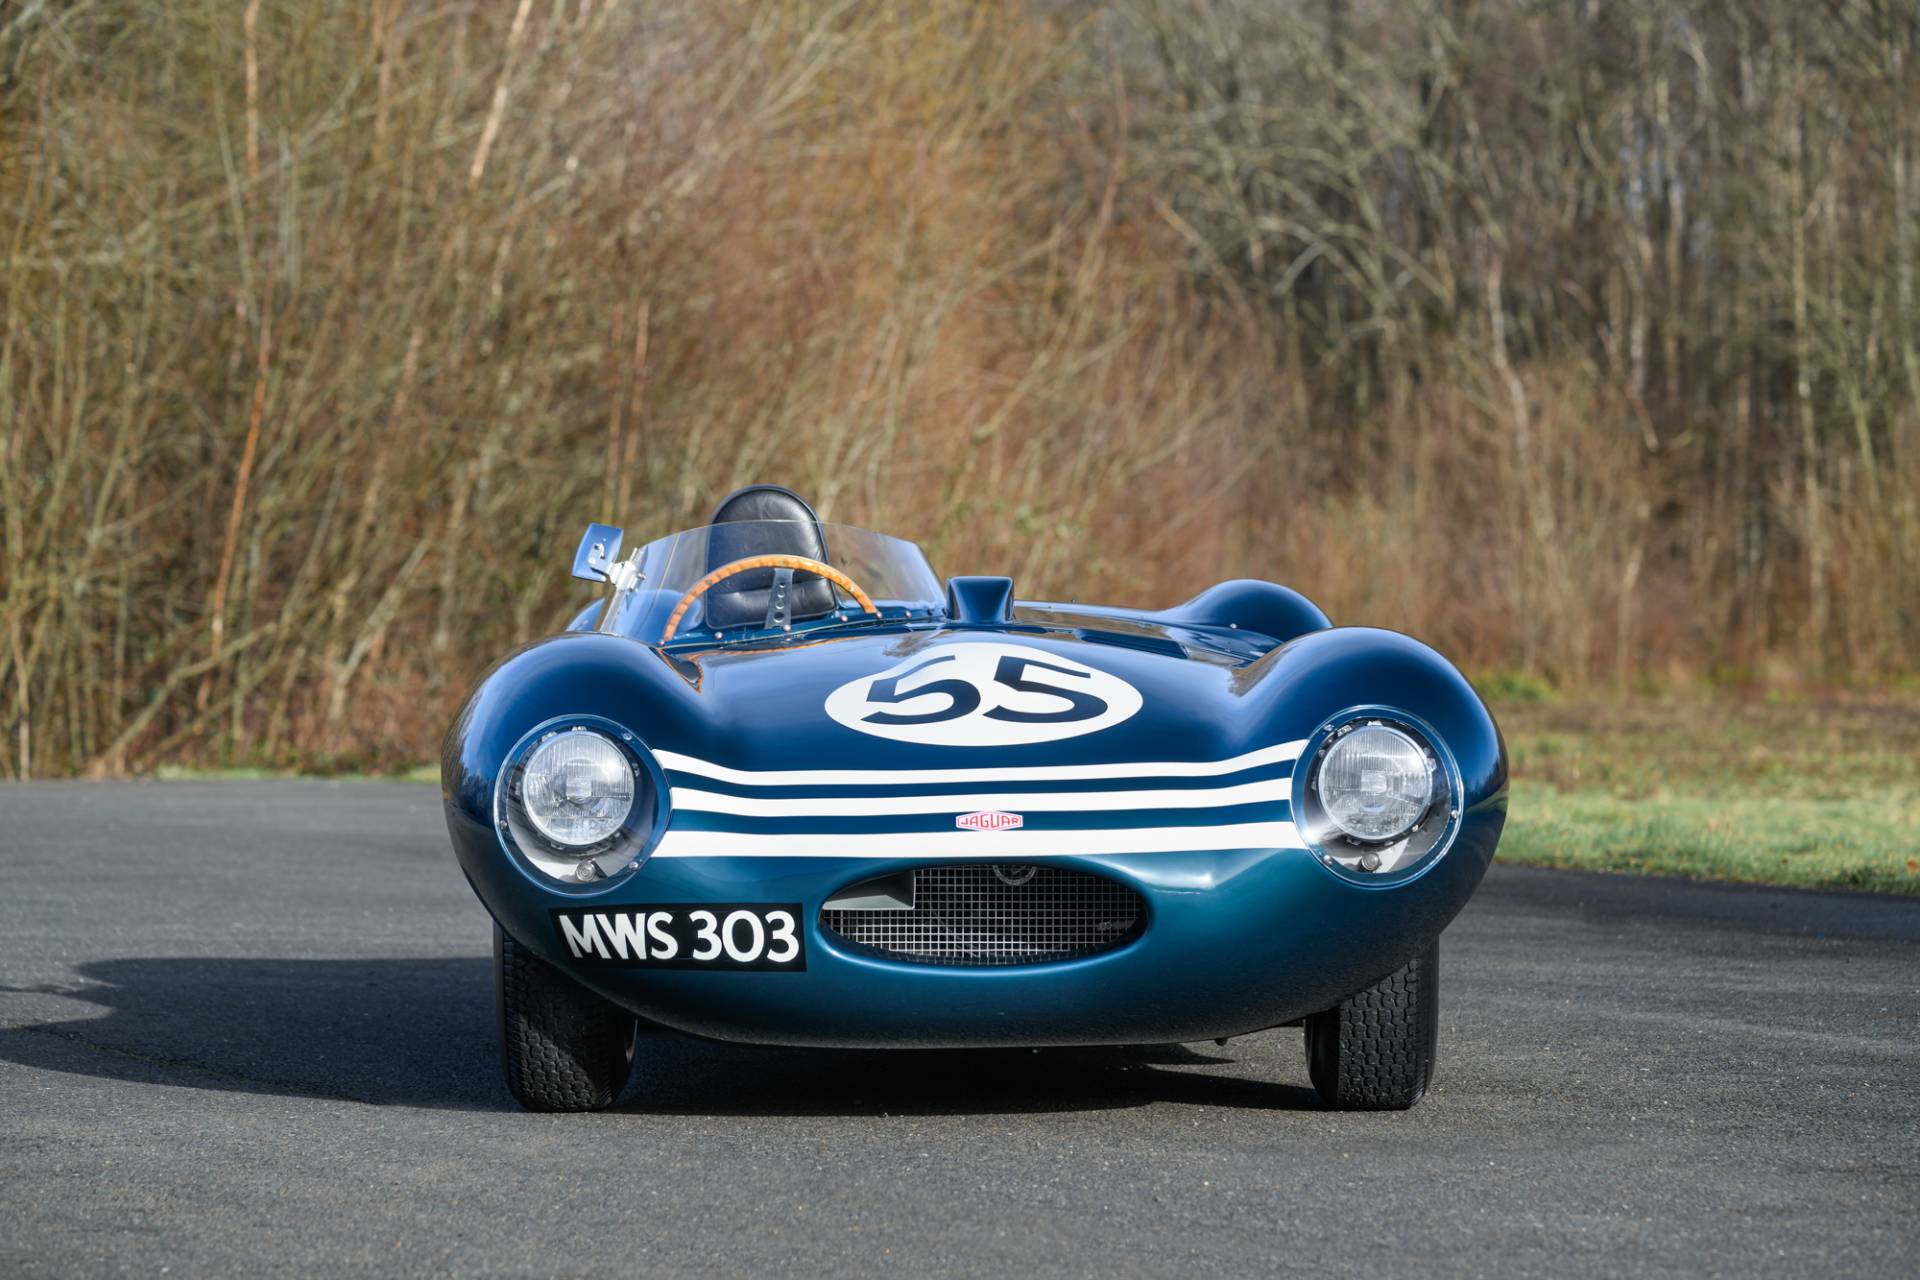 For Sale: Jaguar D-Type (1956) offered for Price on request